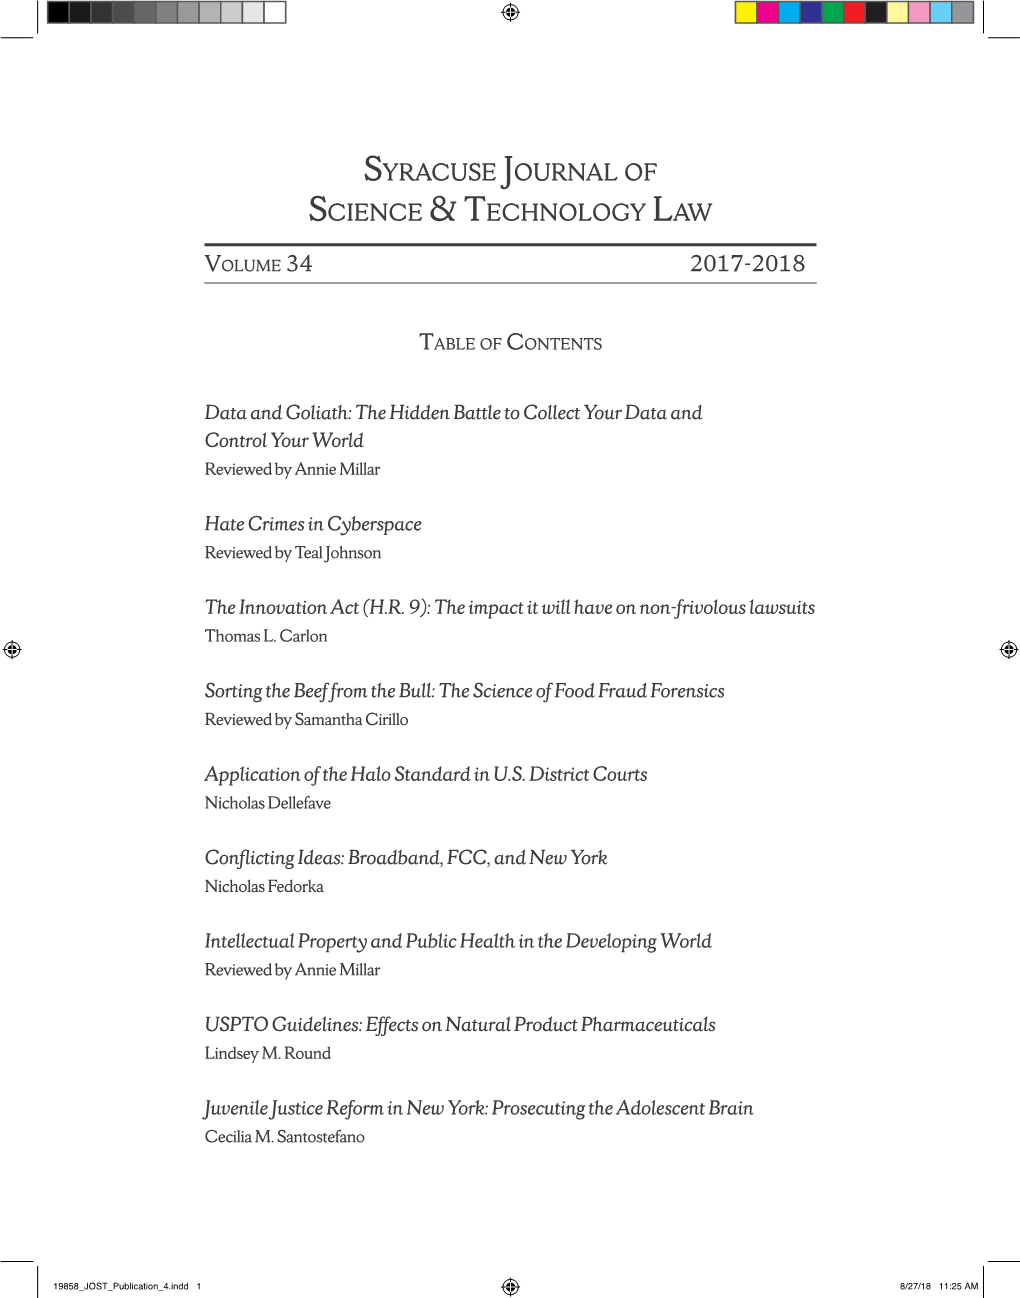 Syracuse Journal of Science & Technology